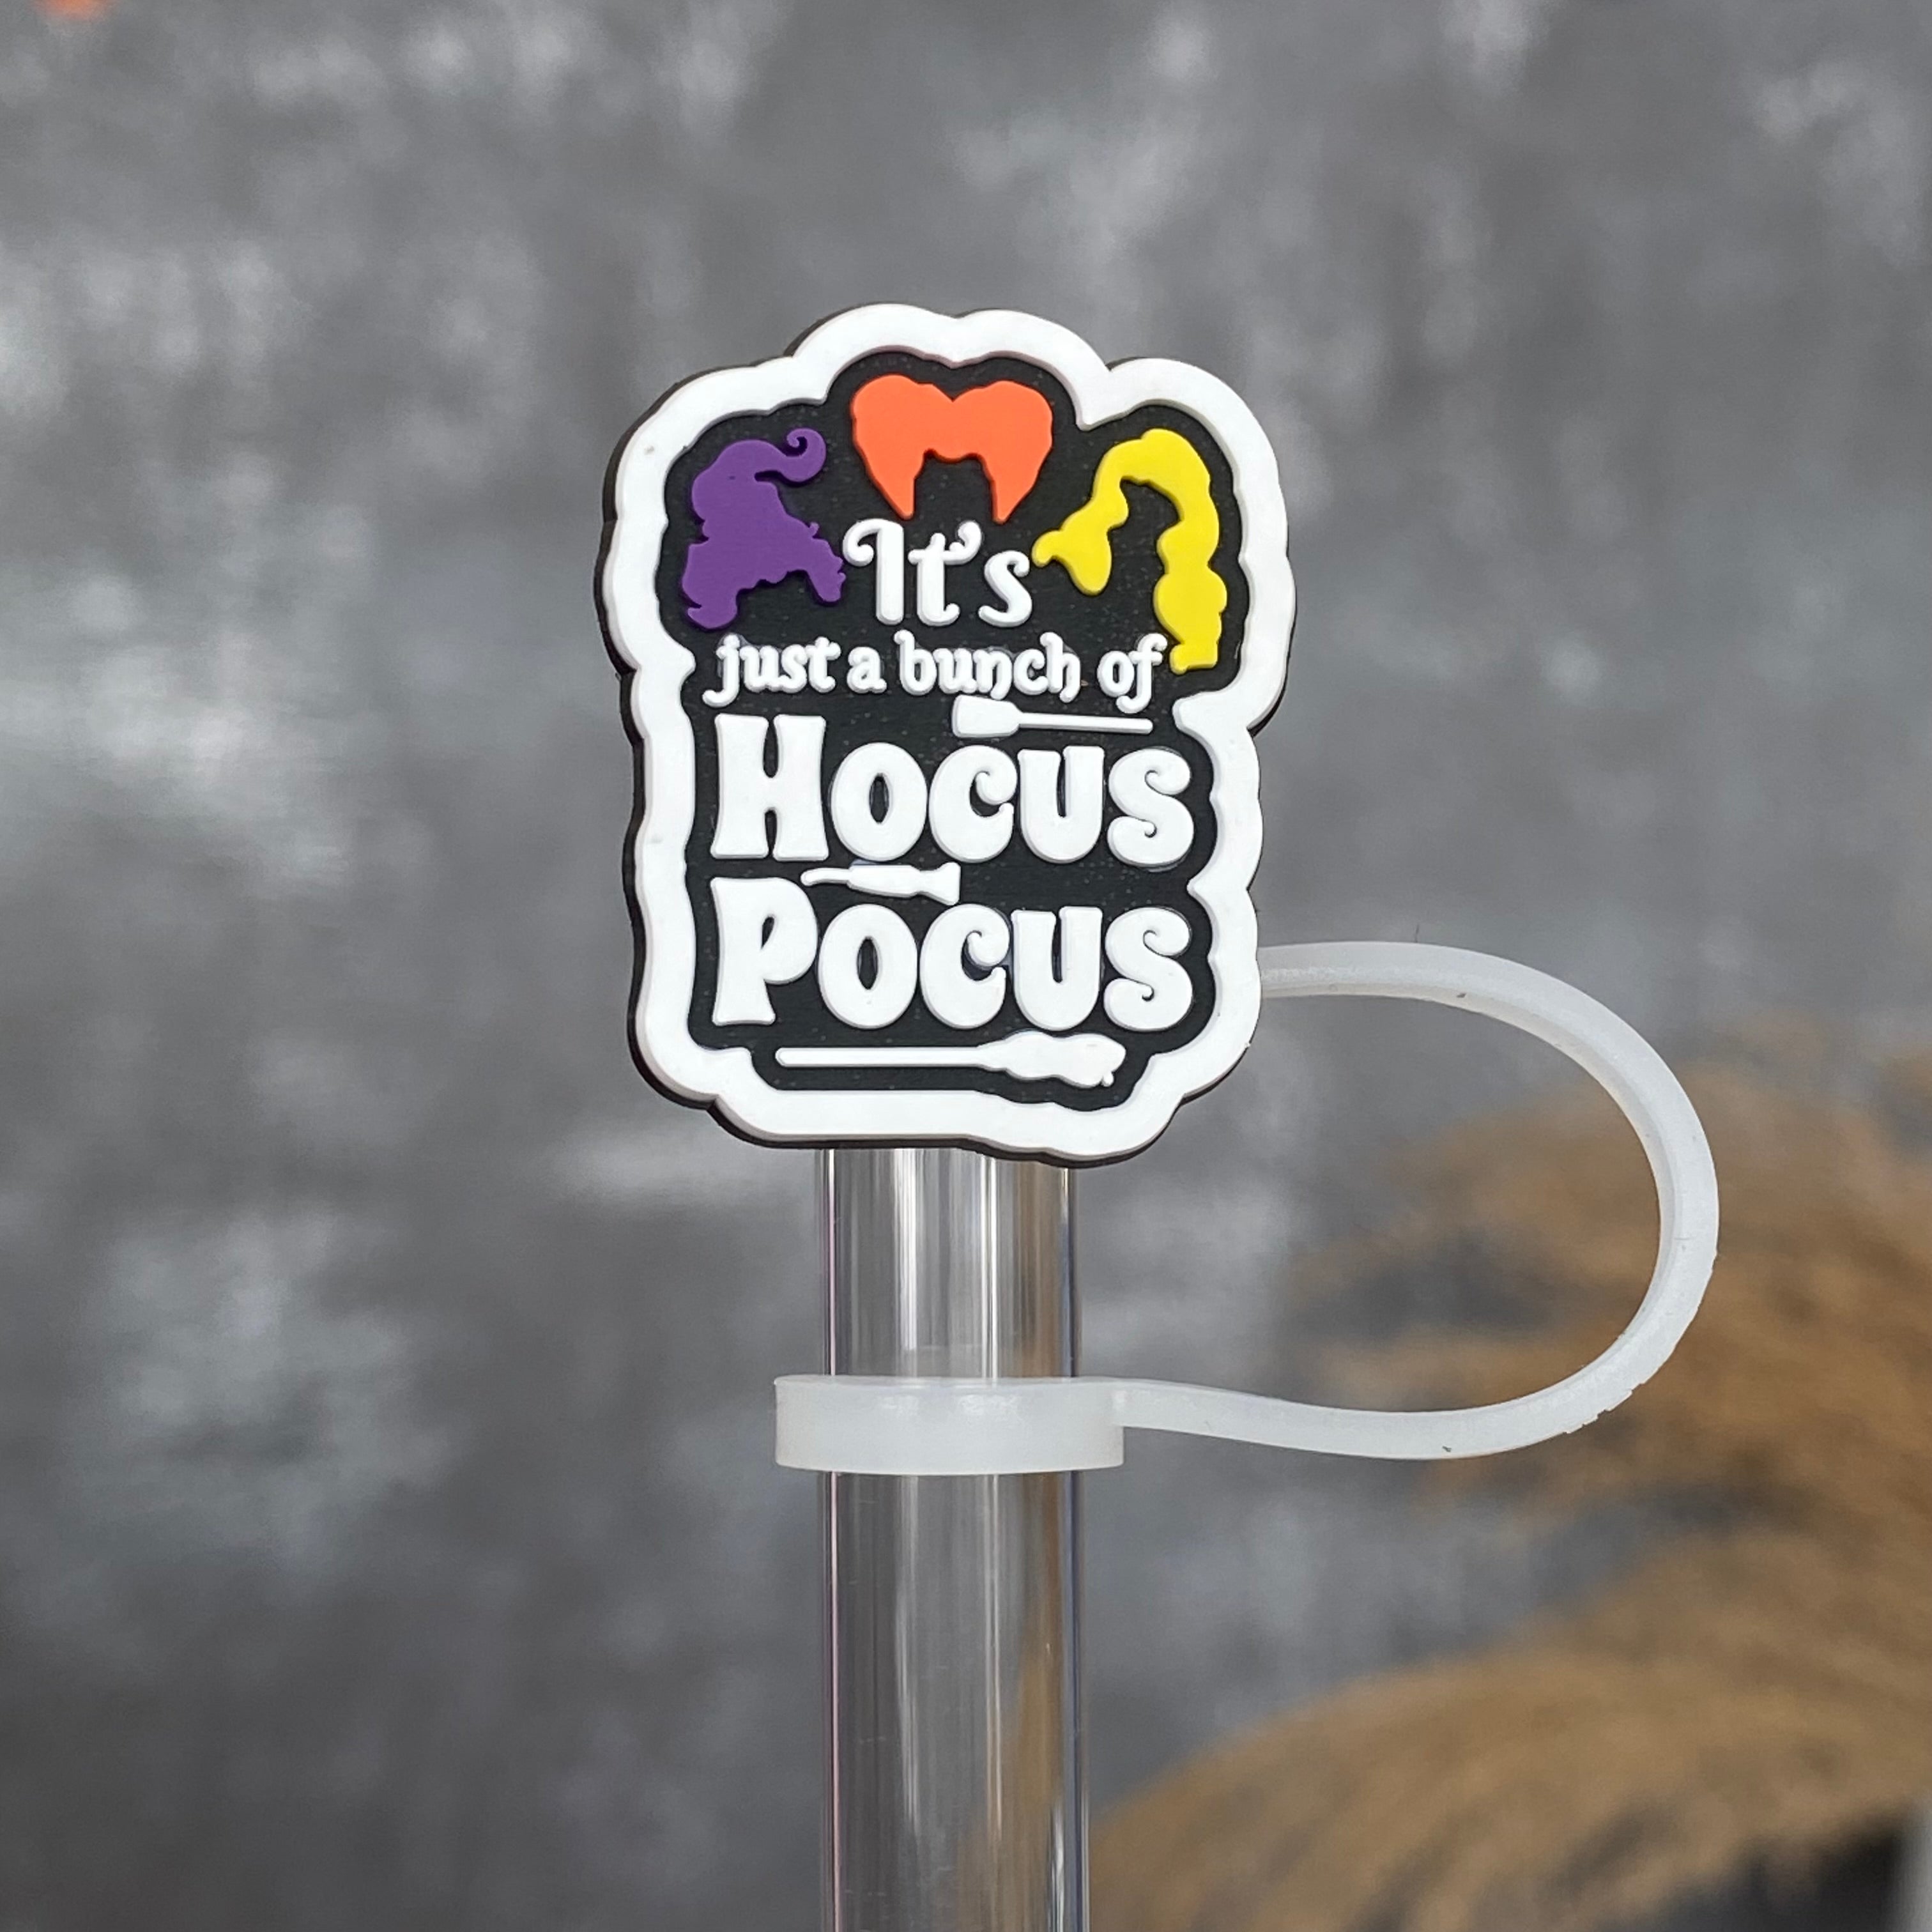 Disney Inspired Halloween Straw Toppers 